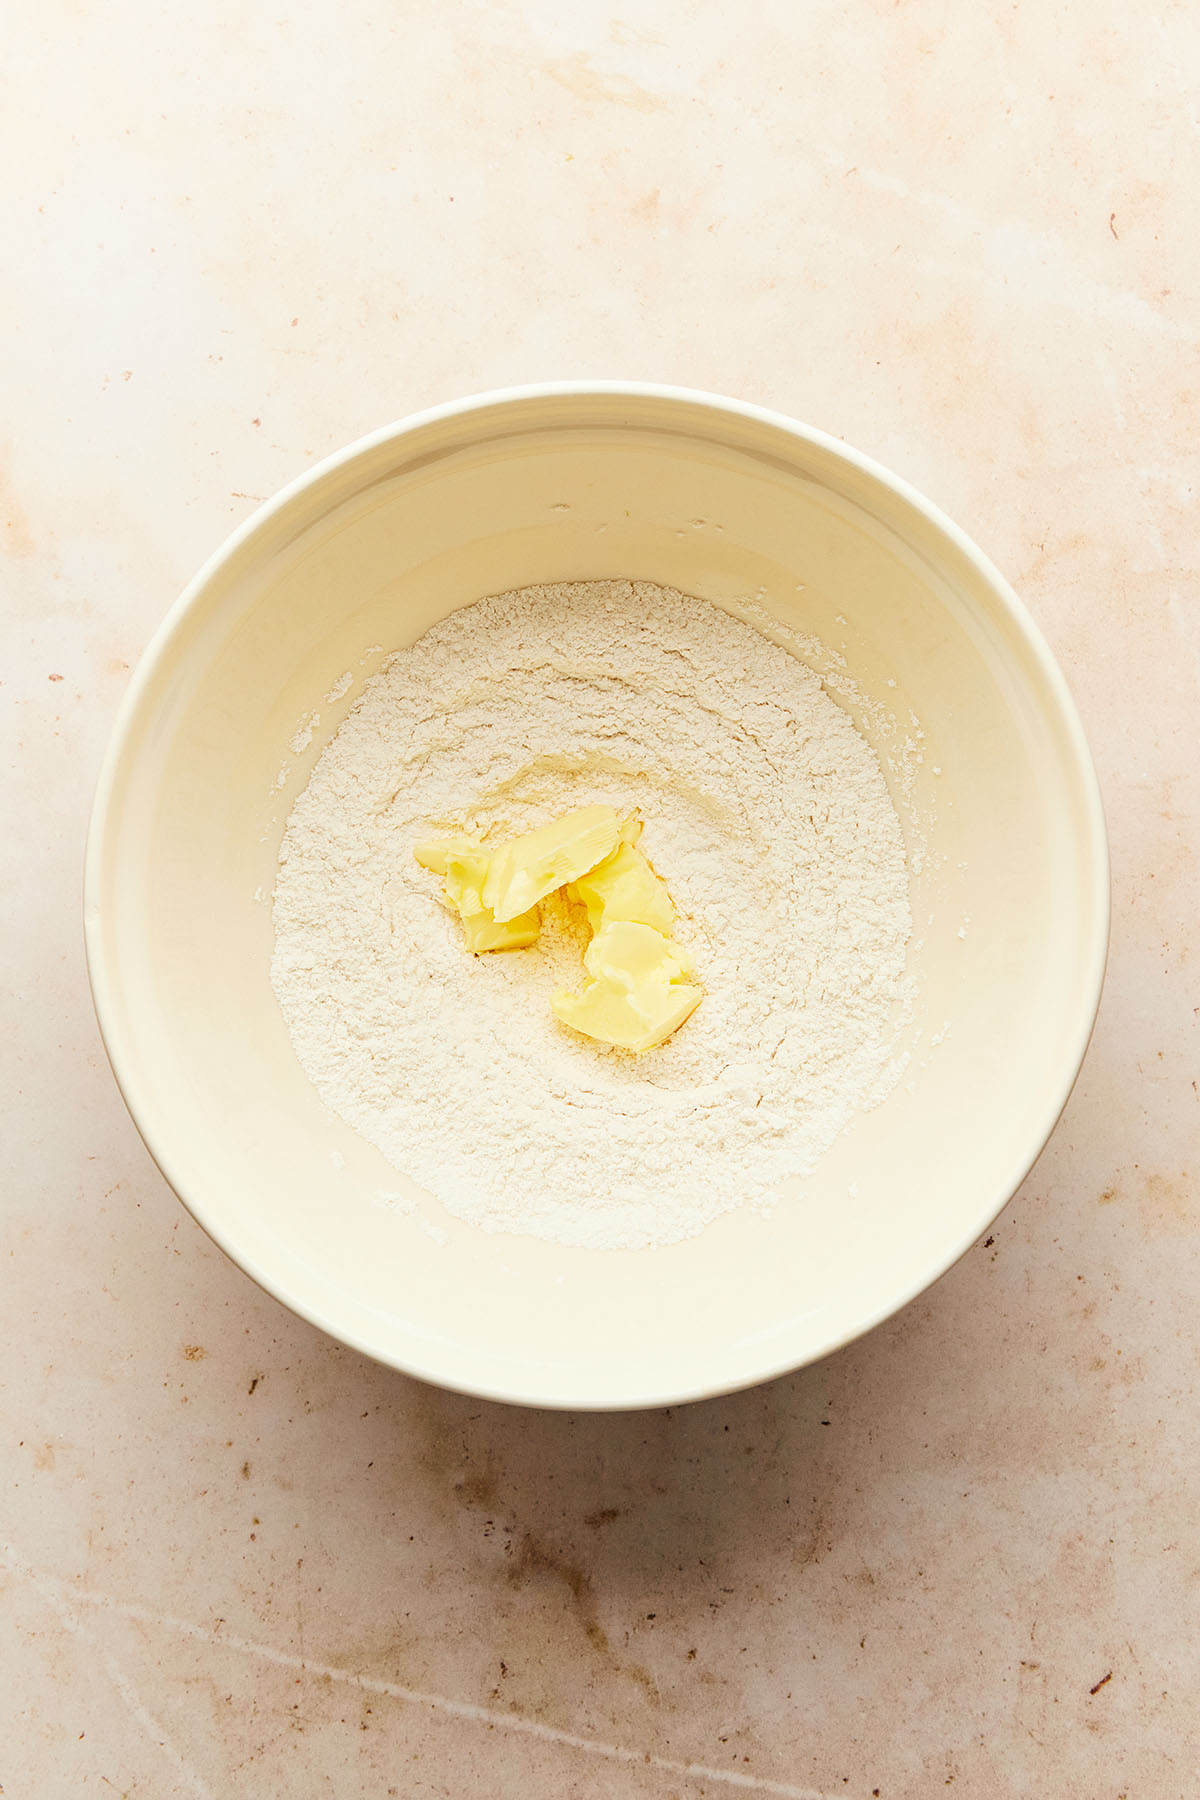 Chunks of butter on top of mixed dry ingredients in a large cream-coloured bowl.